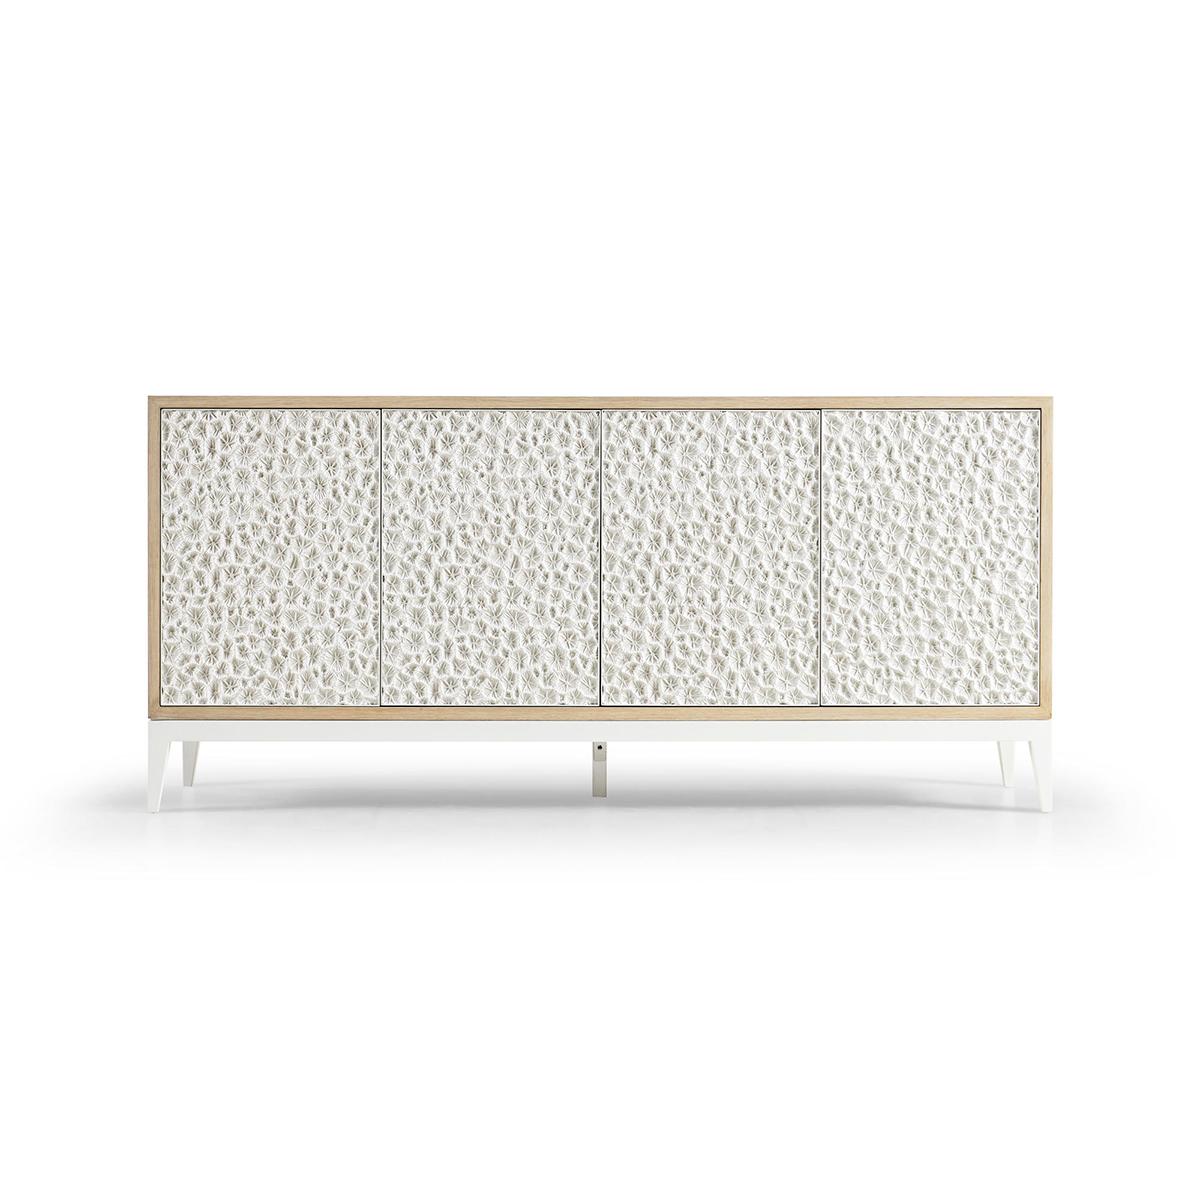 This stunning piece perfectly blends the rustic charm of bleached oak with the intricate beauty of a fossilized coral pattern, meticulously cast in lustrous aluminum.

Equipped with four touch-latch doors that open to reveal ample space, including a